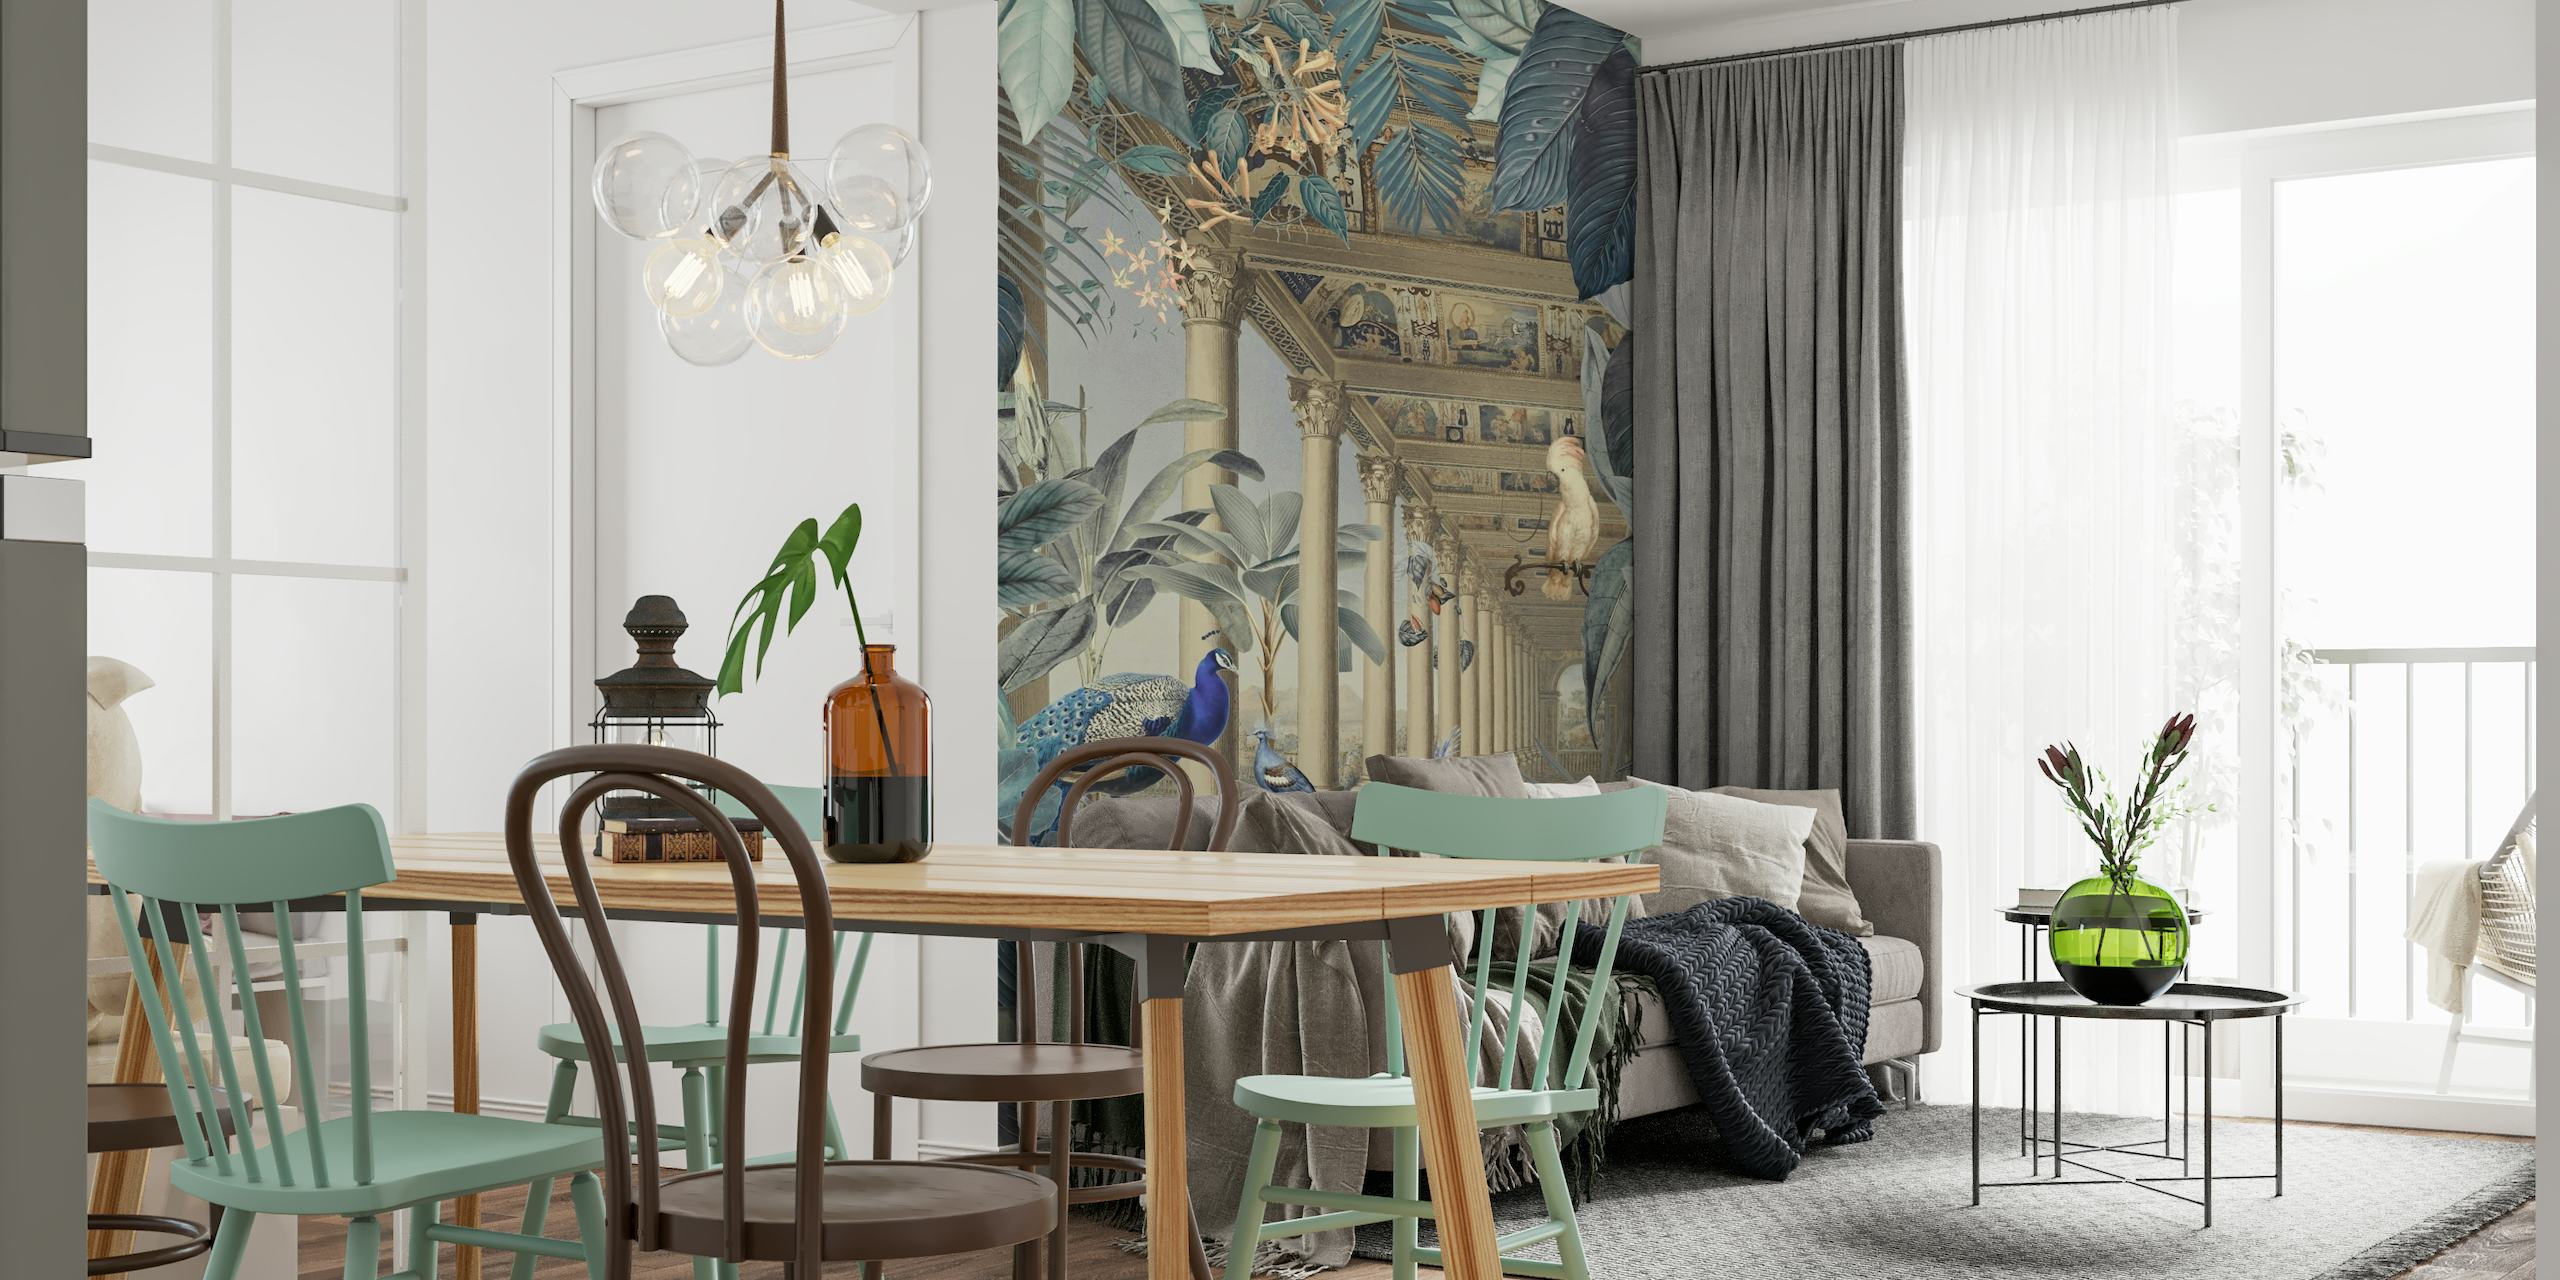 A peacock-themed wall mural showcasing a blend of lush jungle foliage and classical architecture ruins.